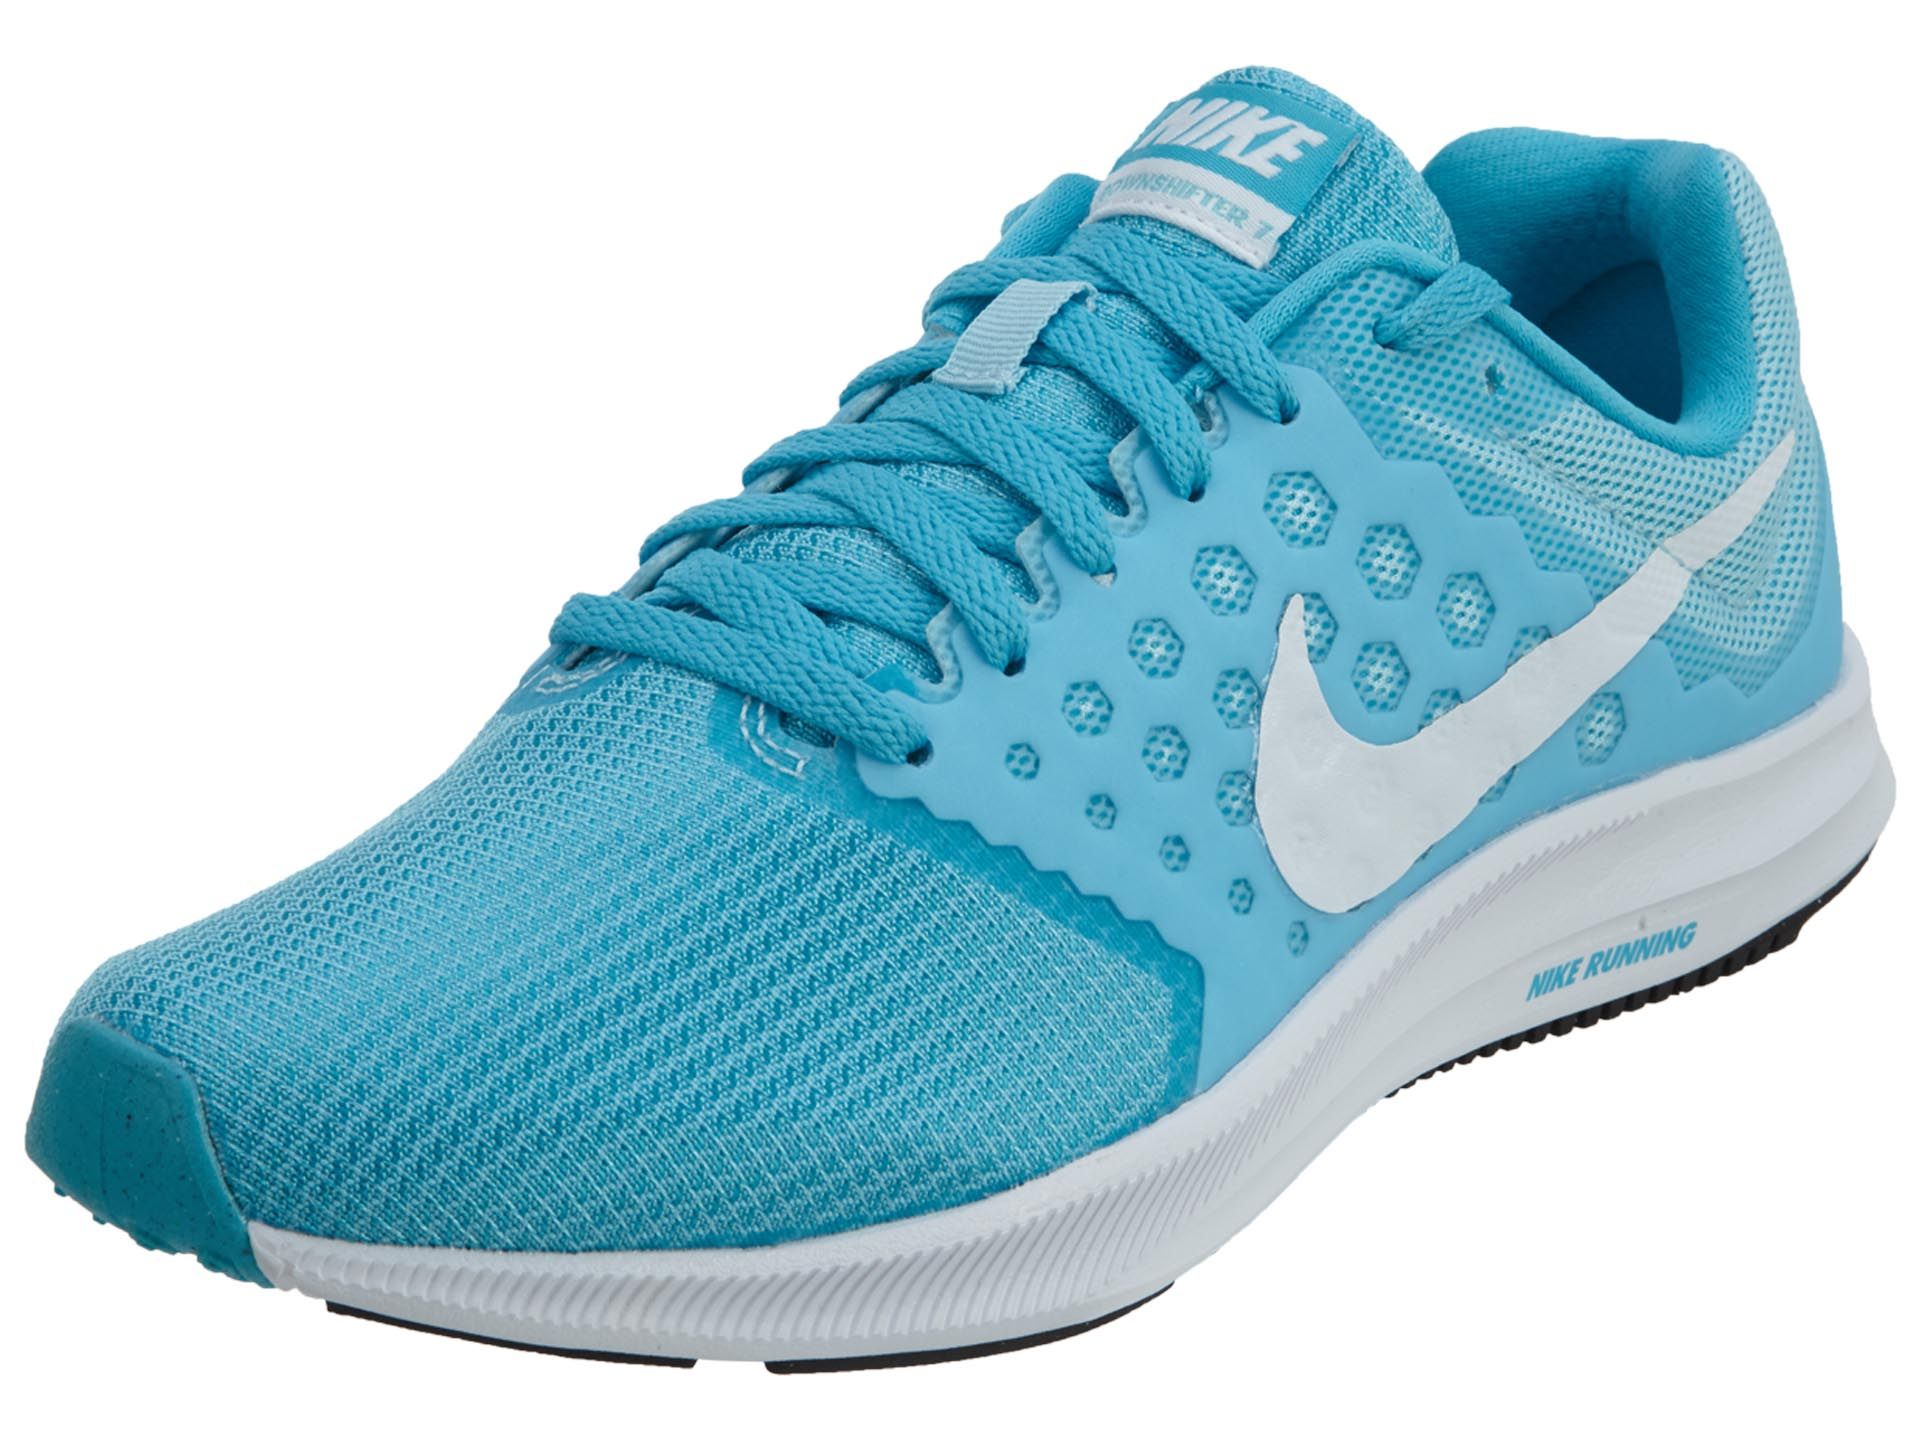 Nike Downshifter 7 Womens Style : 852466-401